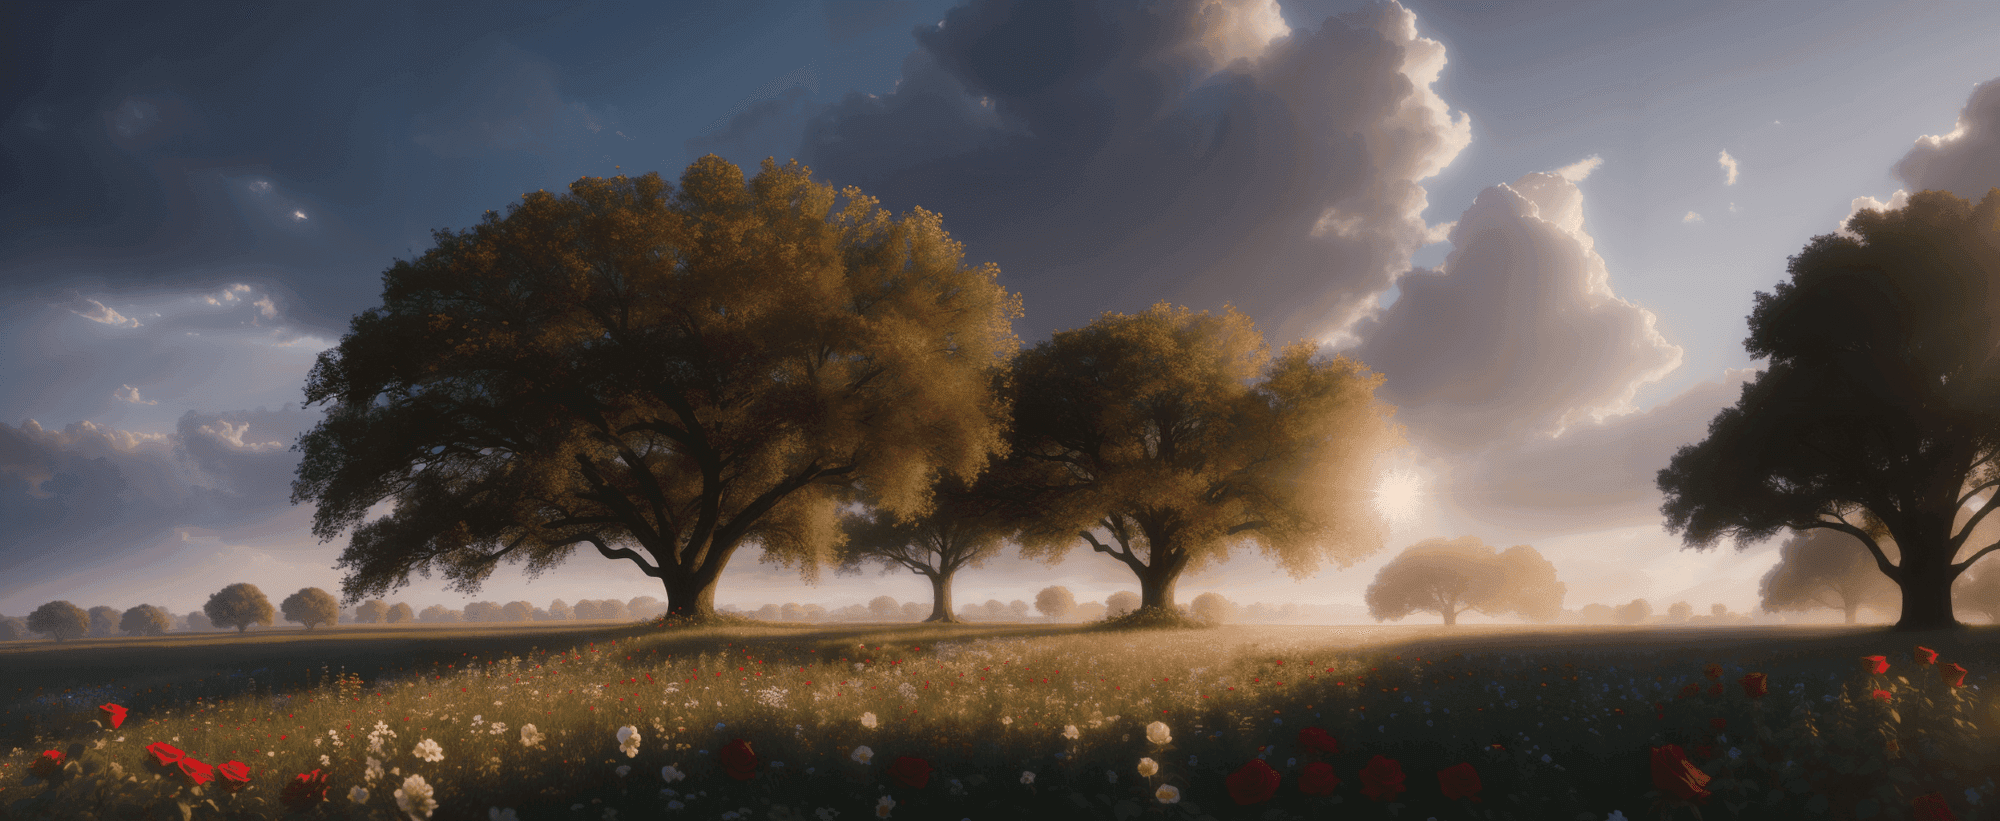 Trees in a field of flowers at sunset